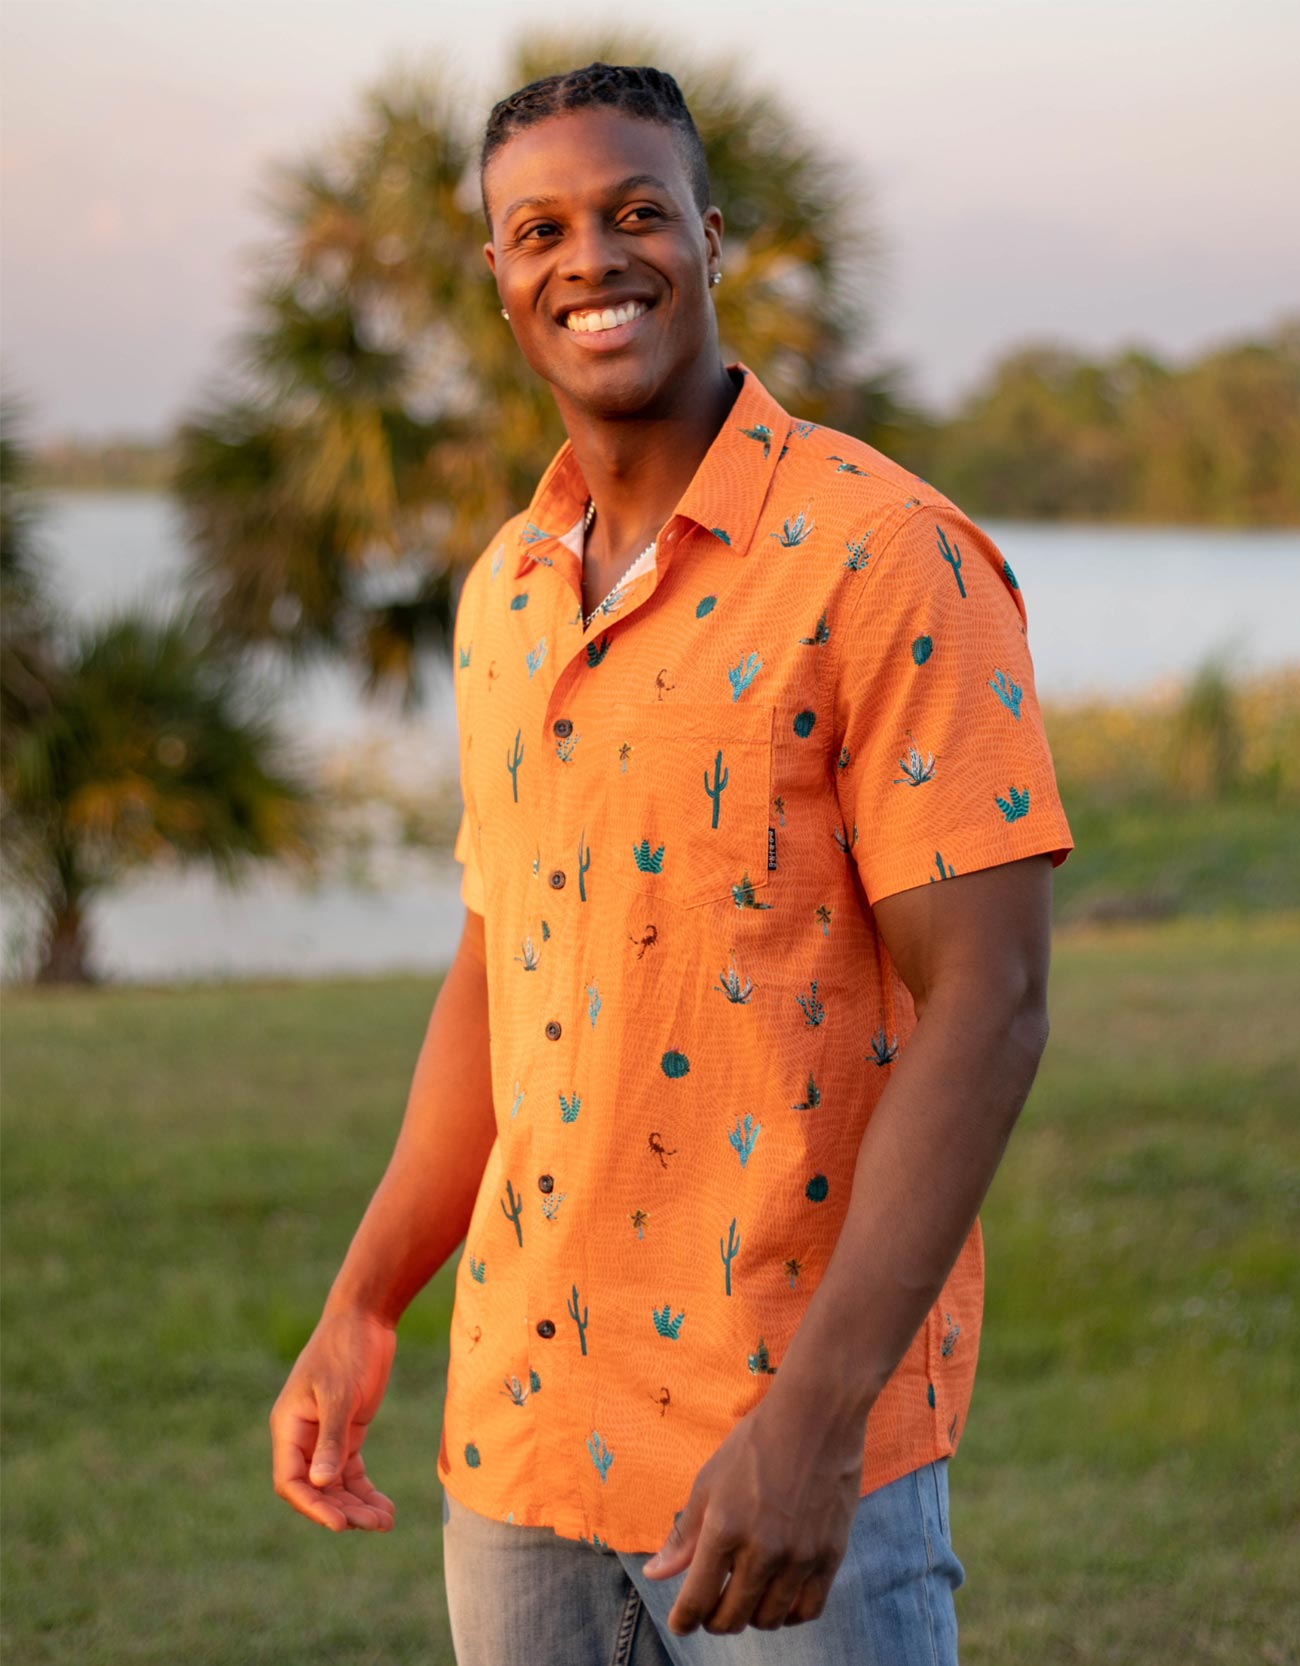 Button up shirt with hand painted watercolor cactus design on orange background.